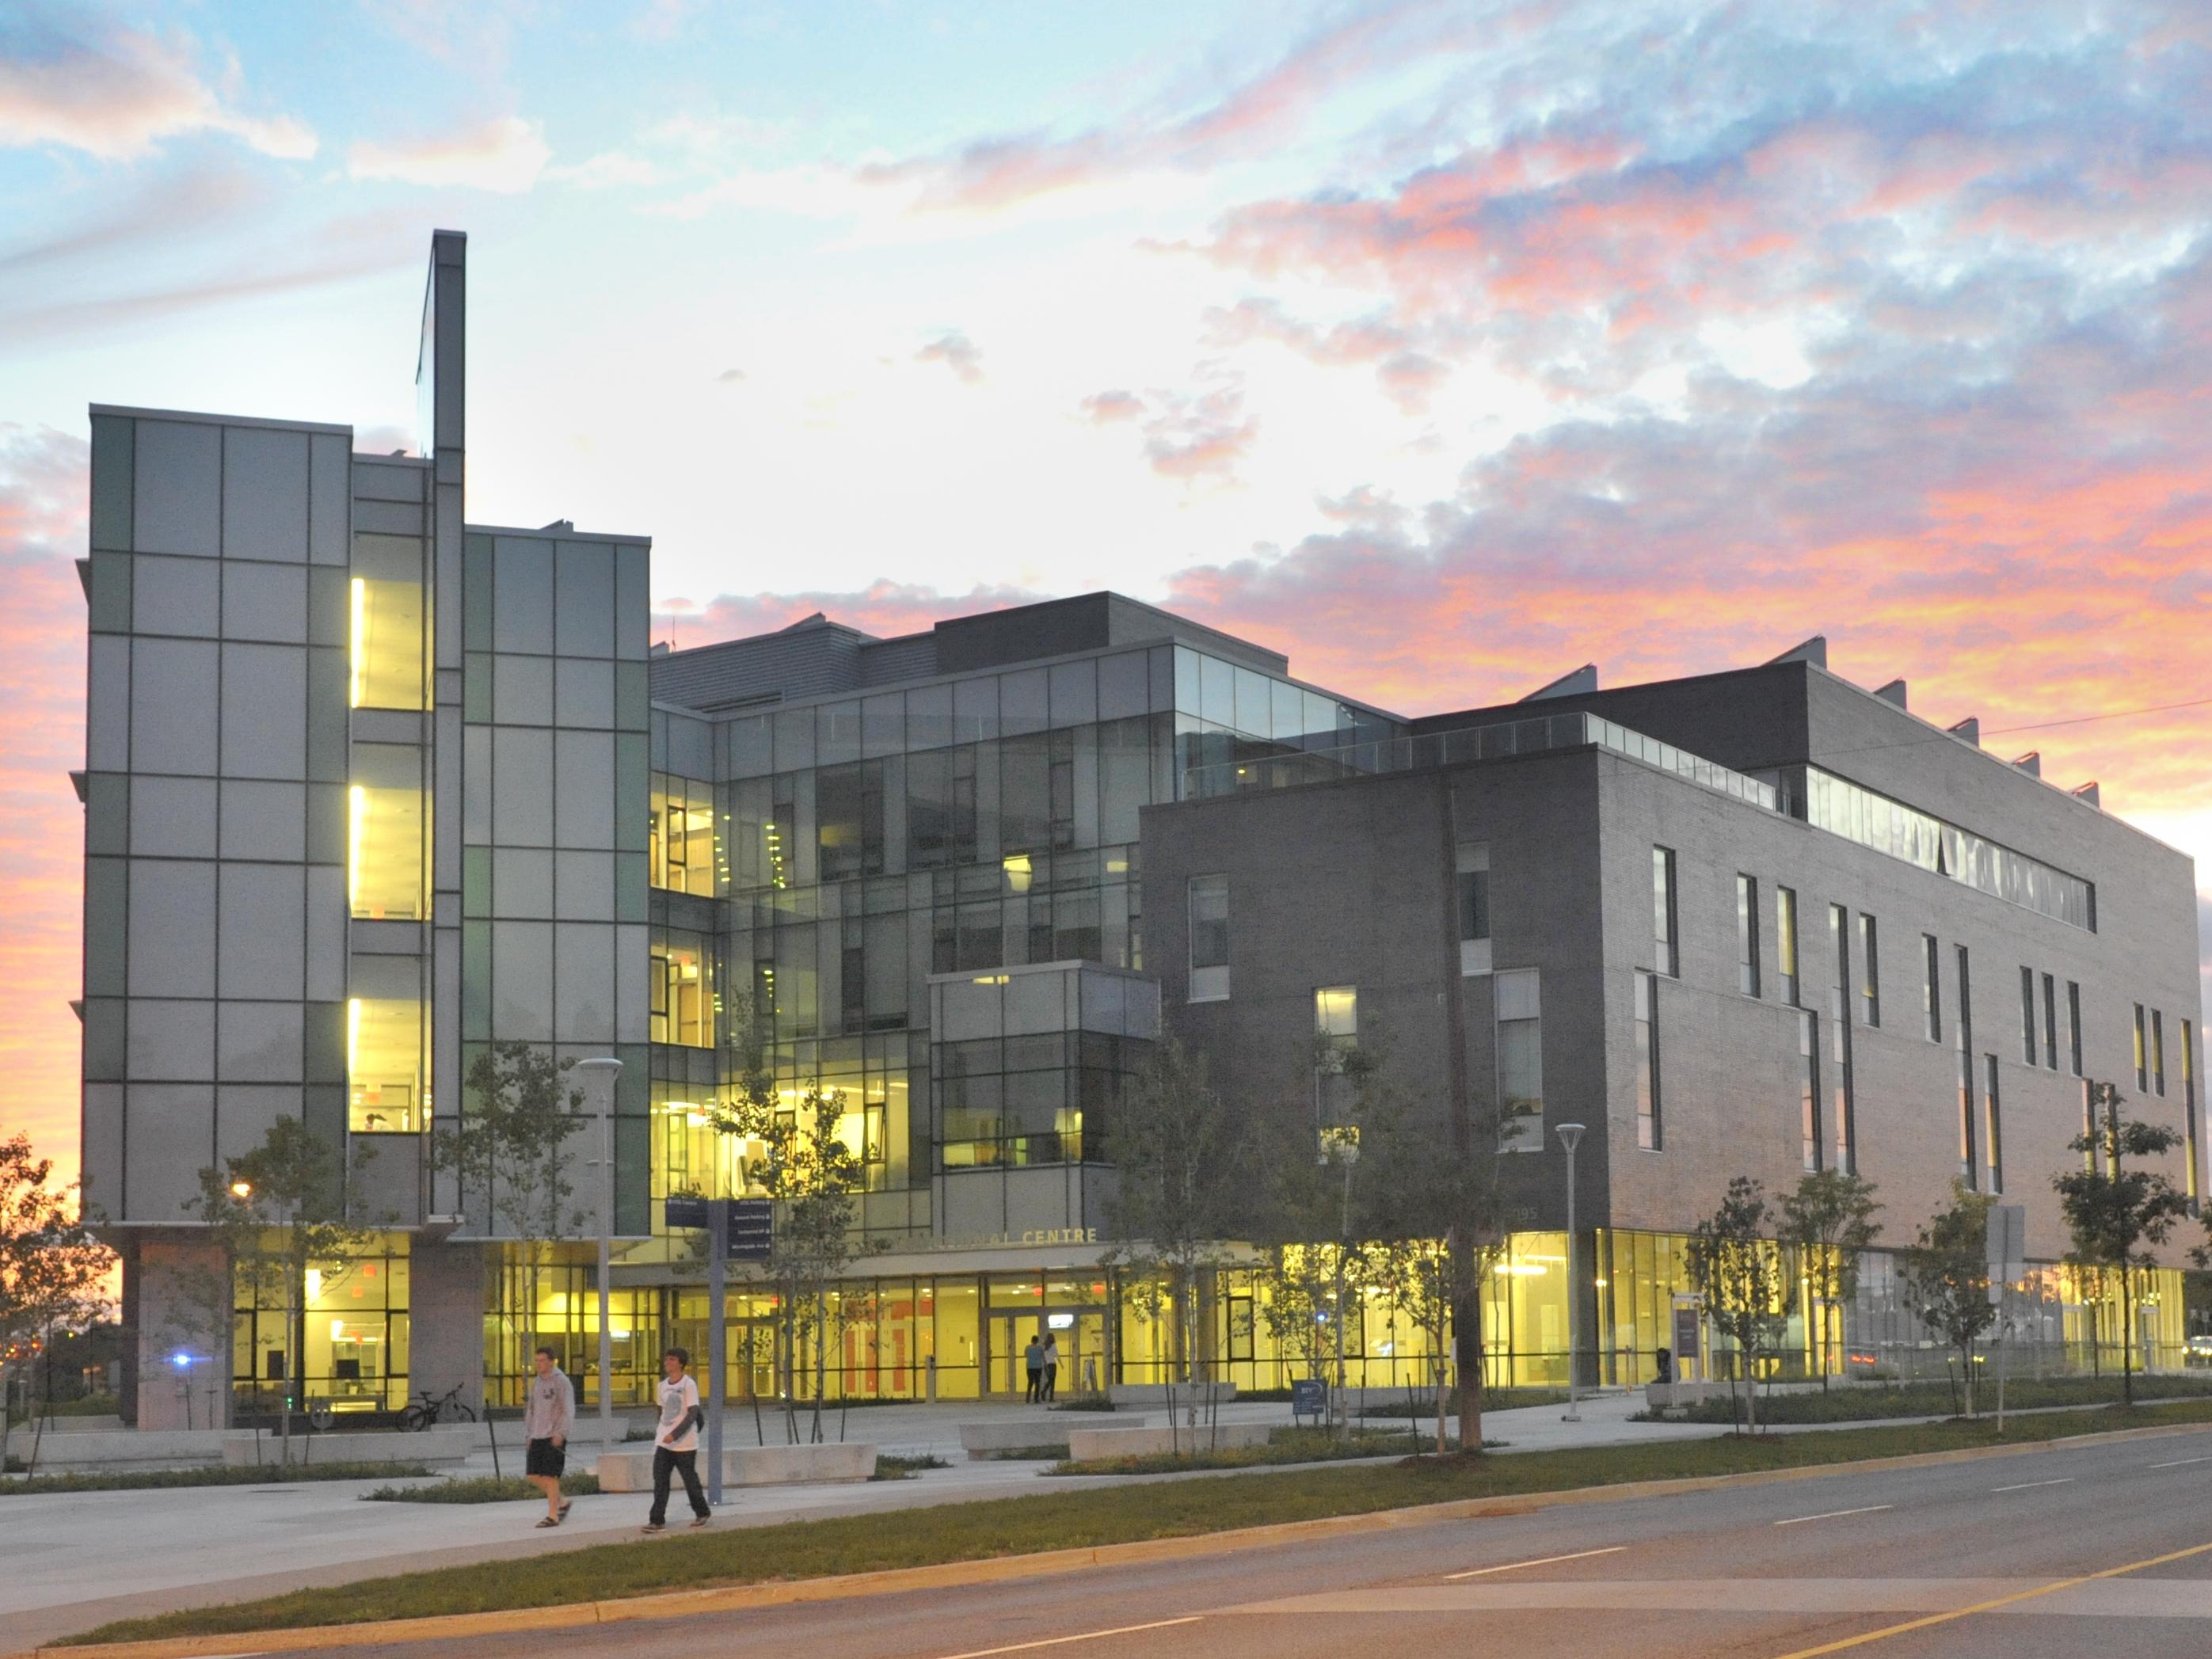 Instructional Centre, home of Management at U of T Scarborough